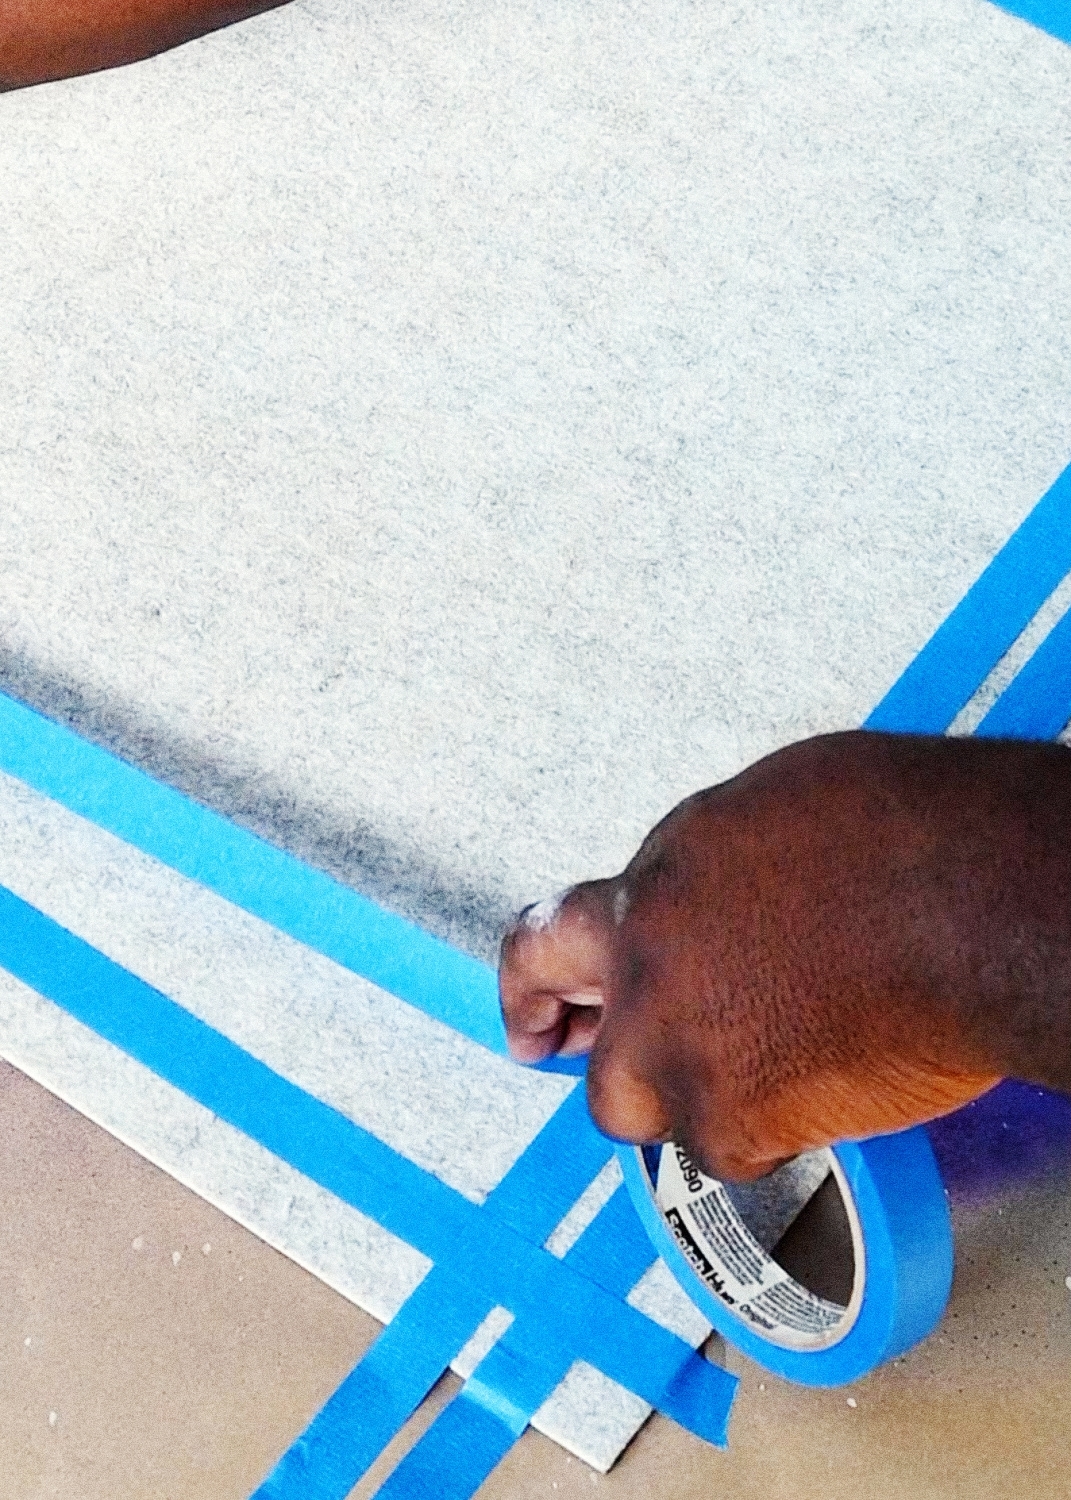 Apply painter’s tape to the edges of doormat